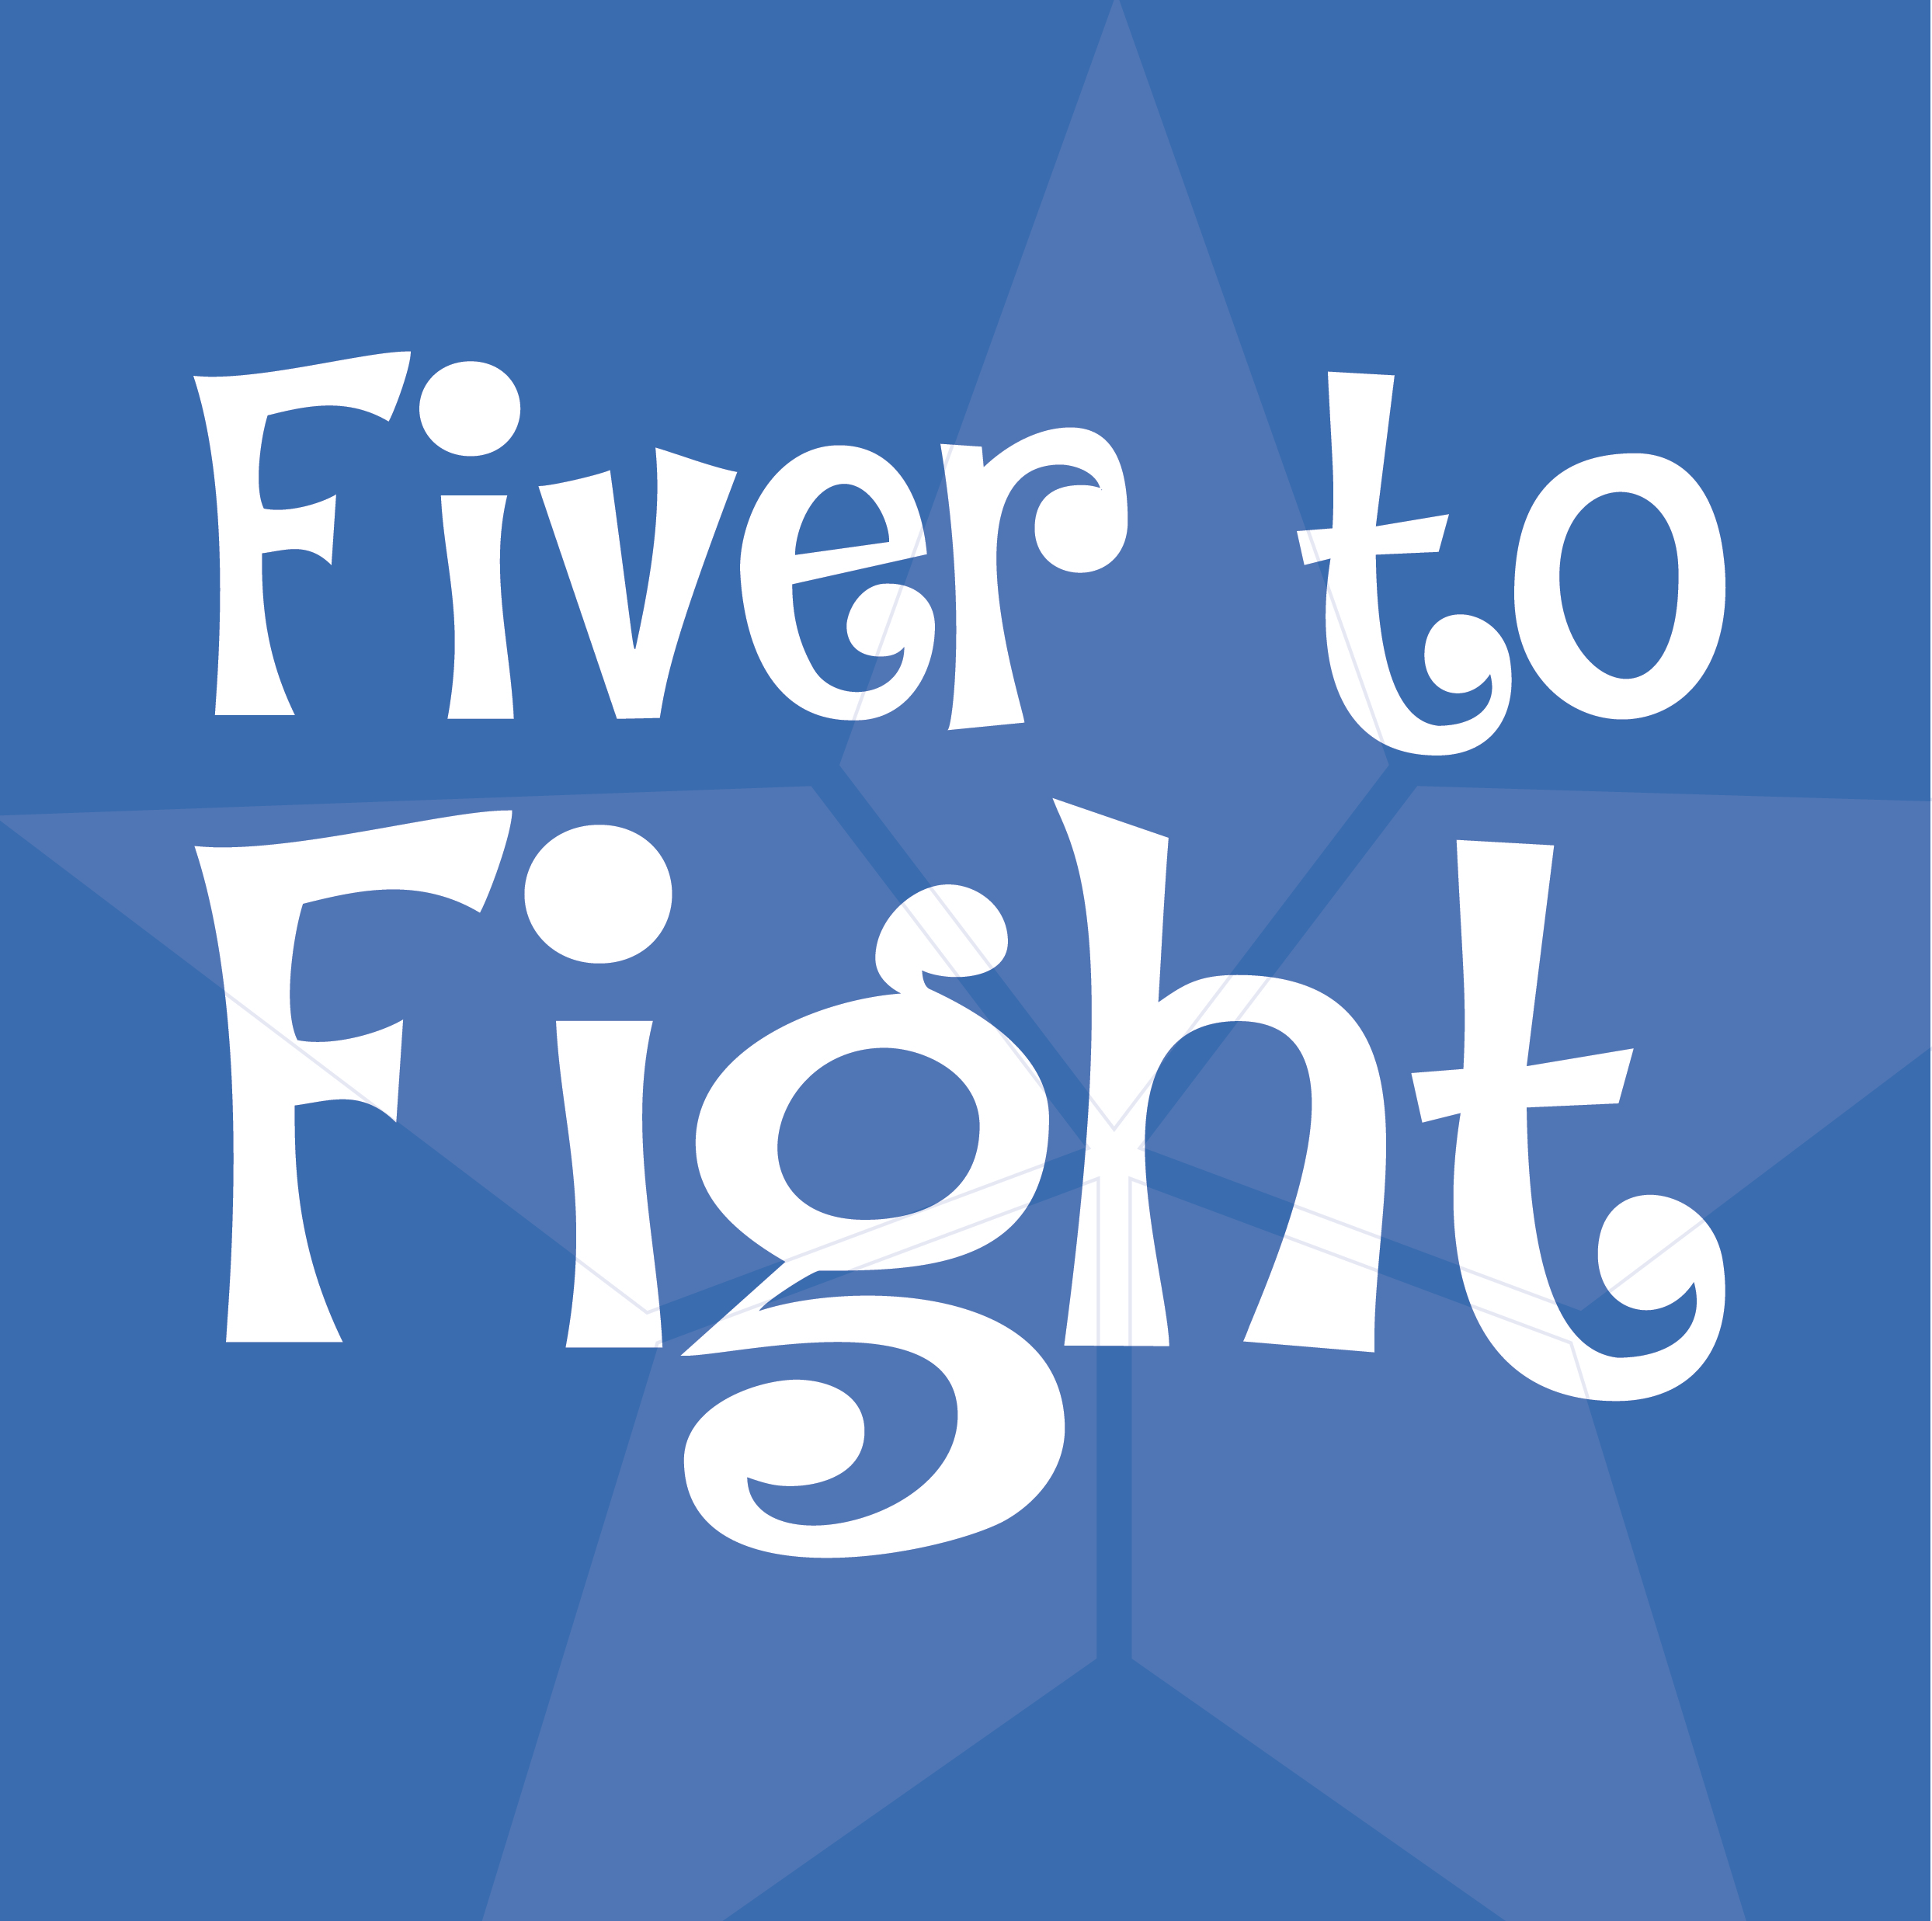 Fiver to fight